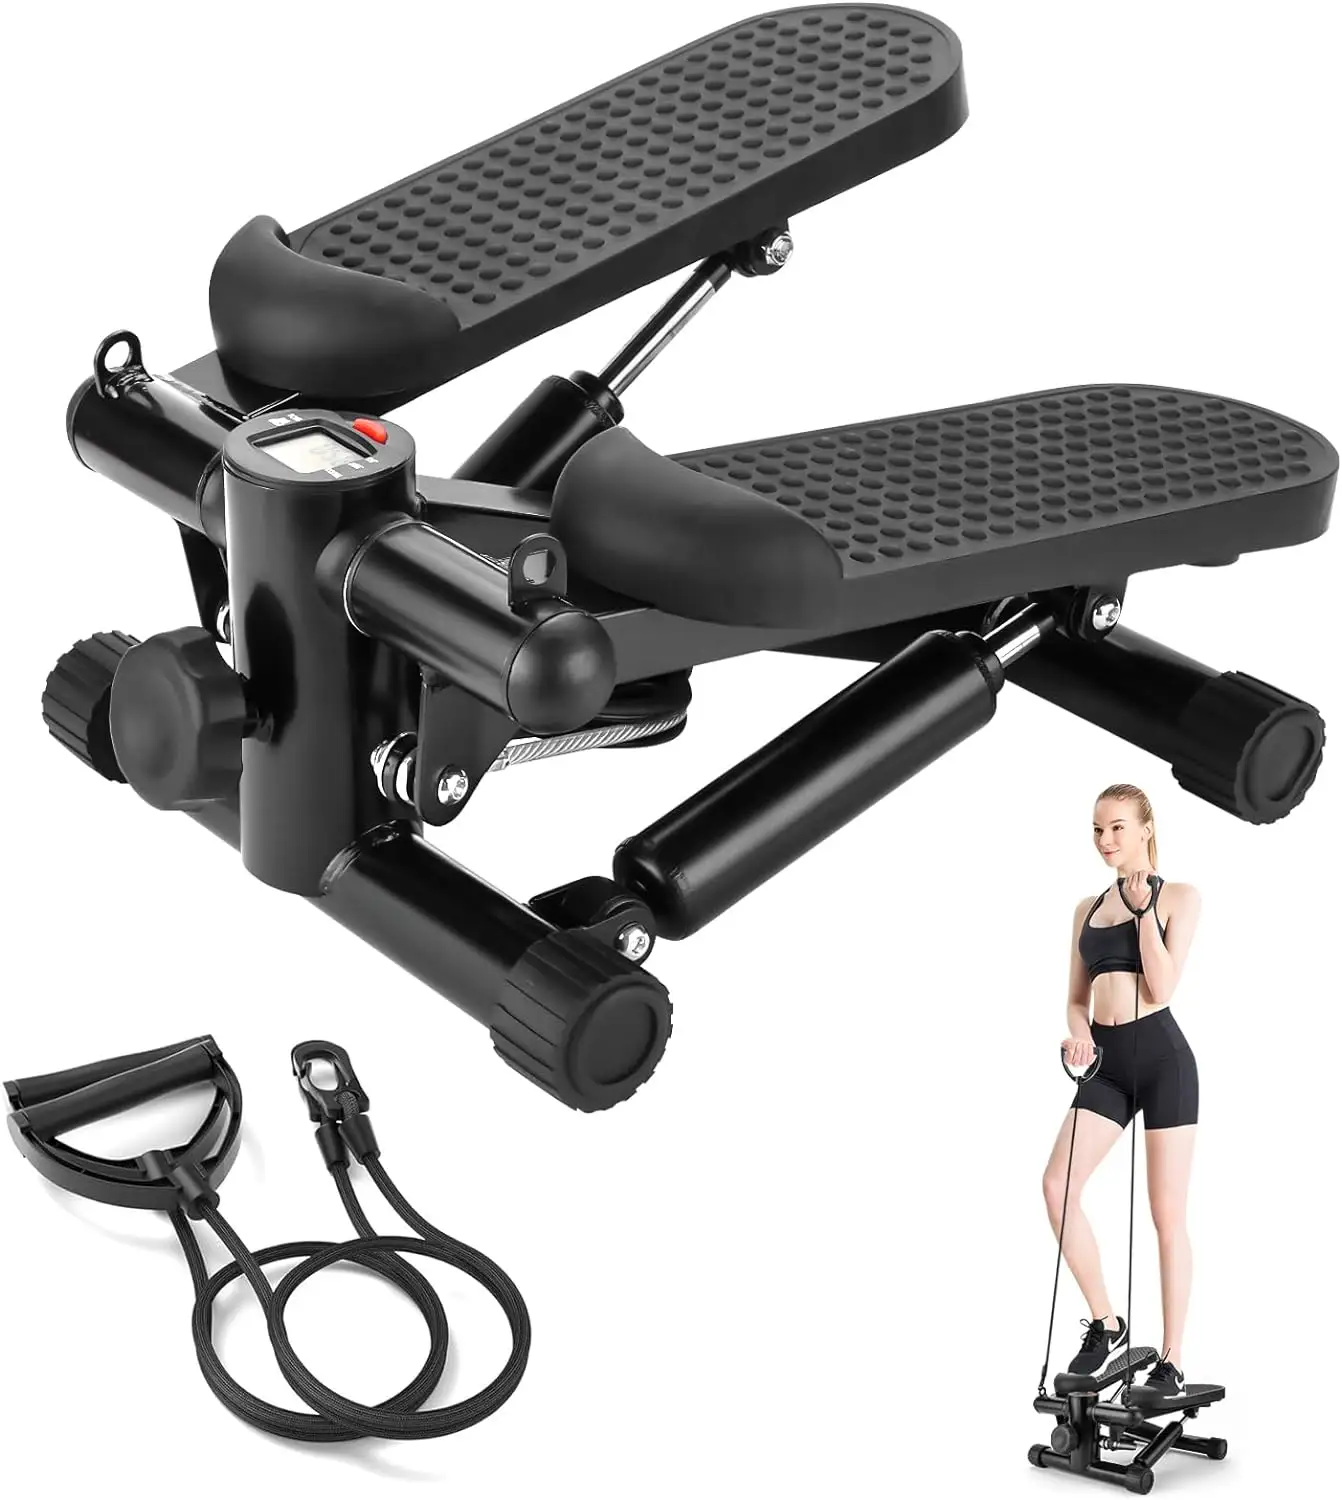 Home Workout Equipment Stair Stepper For Exercise Mini Steppers With Resistance Band Hydraulic Fitness Stepper